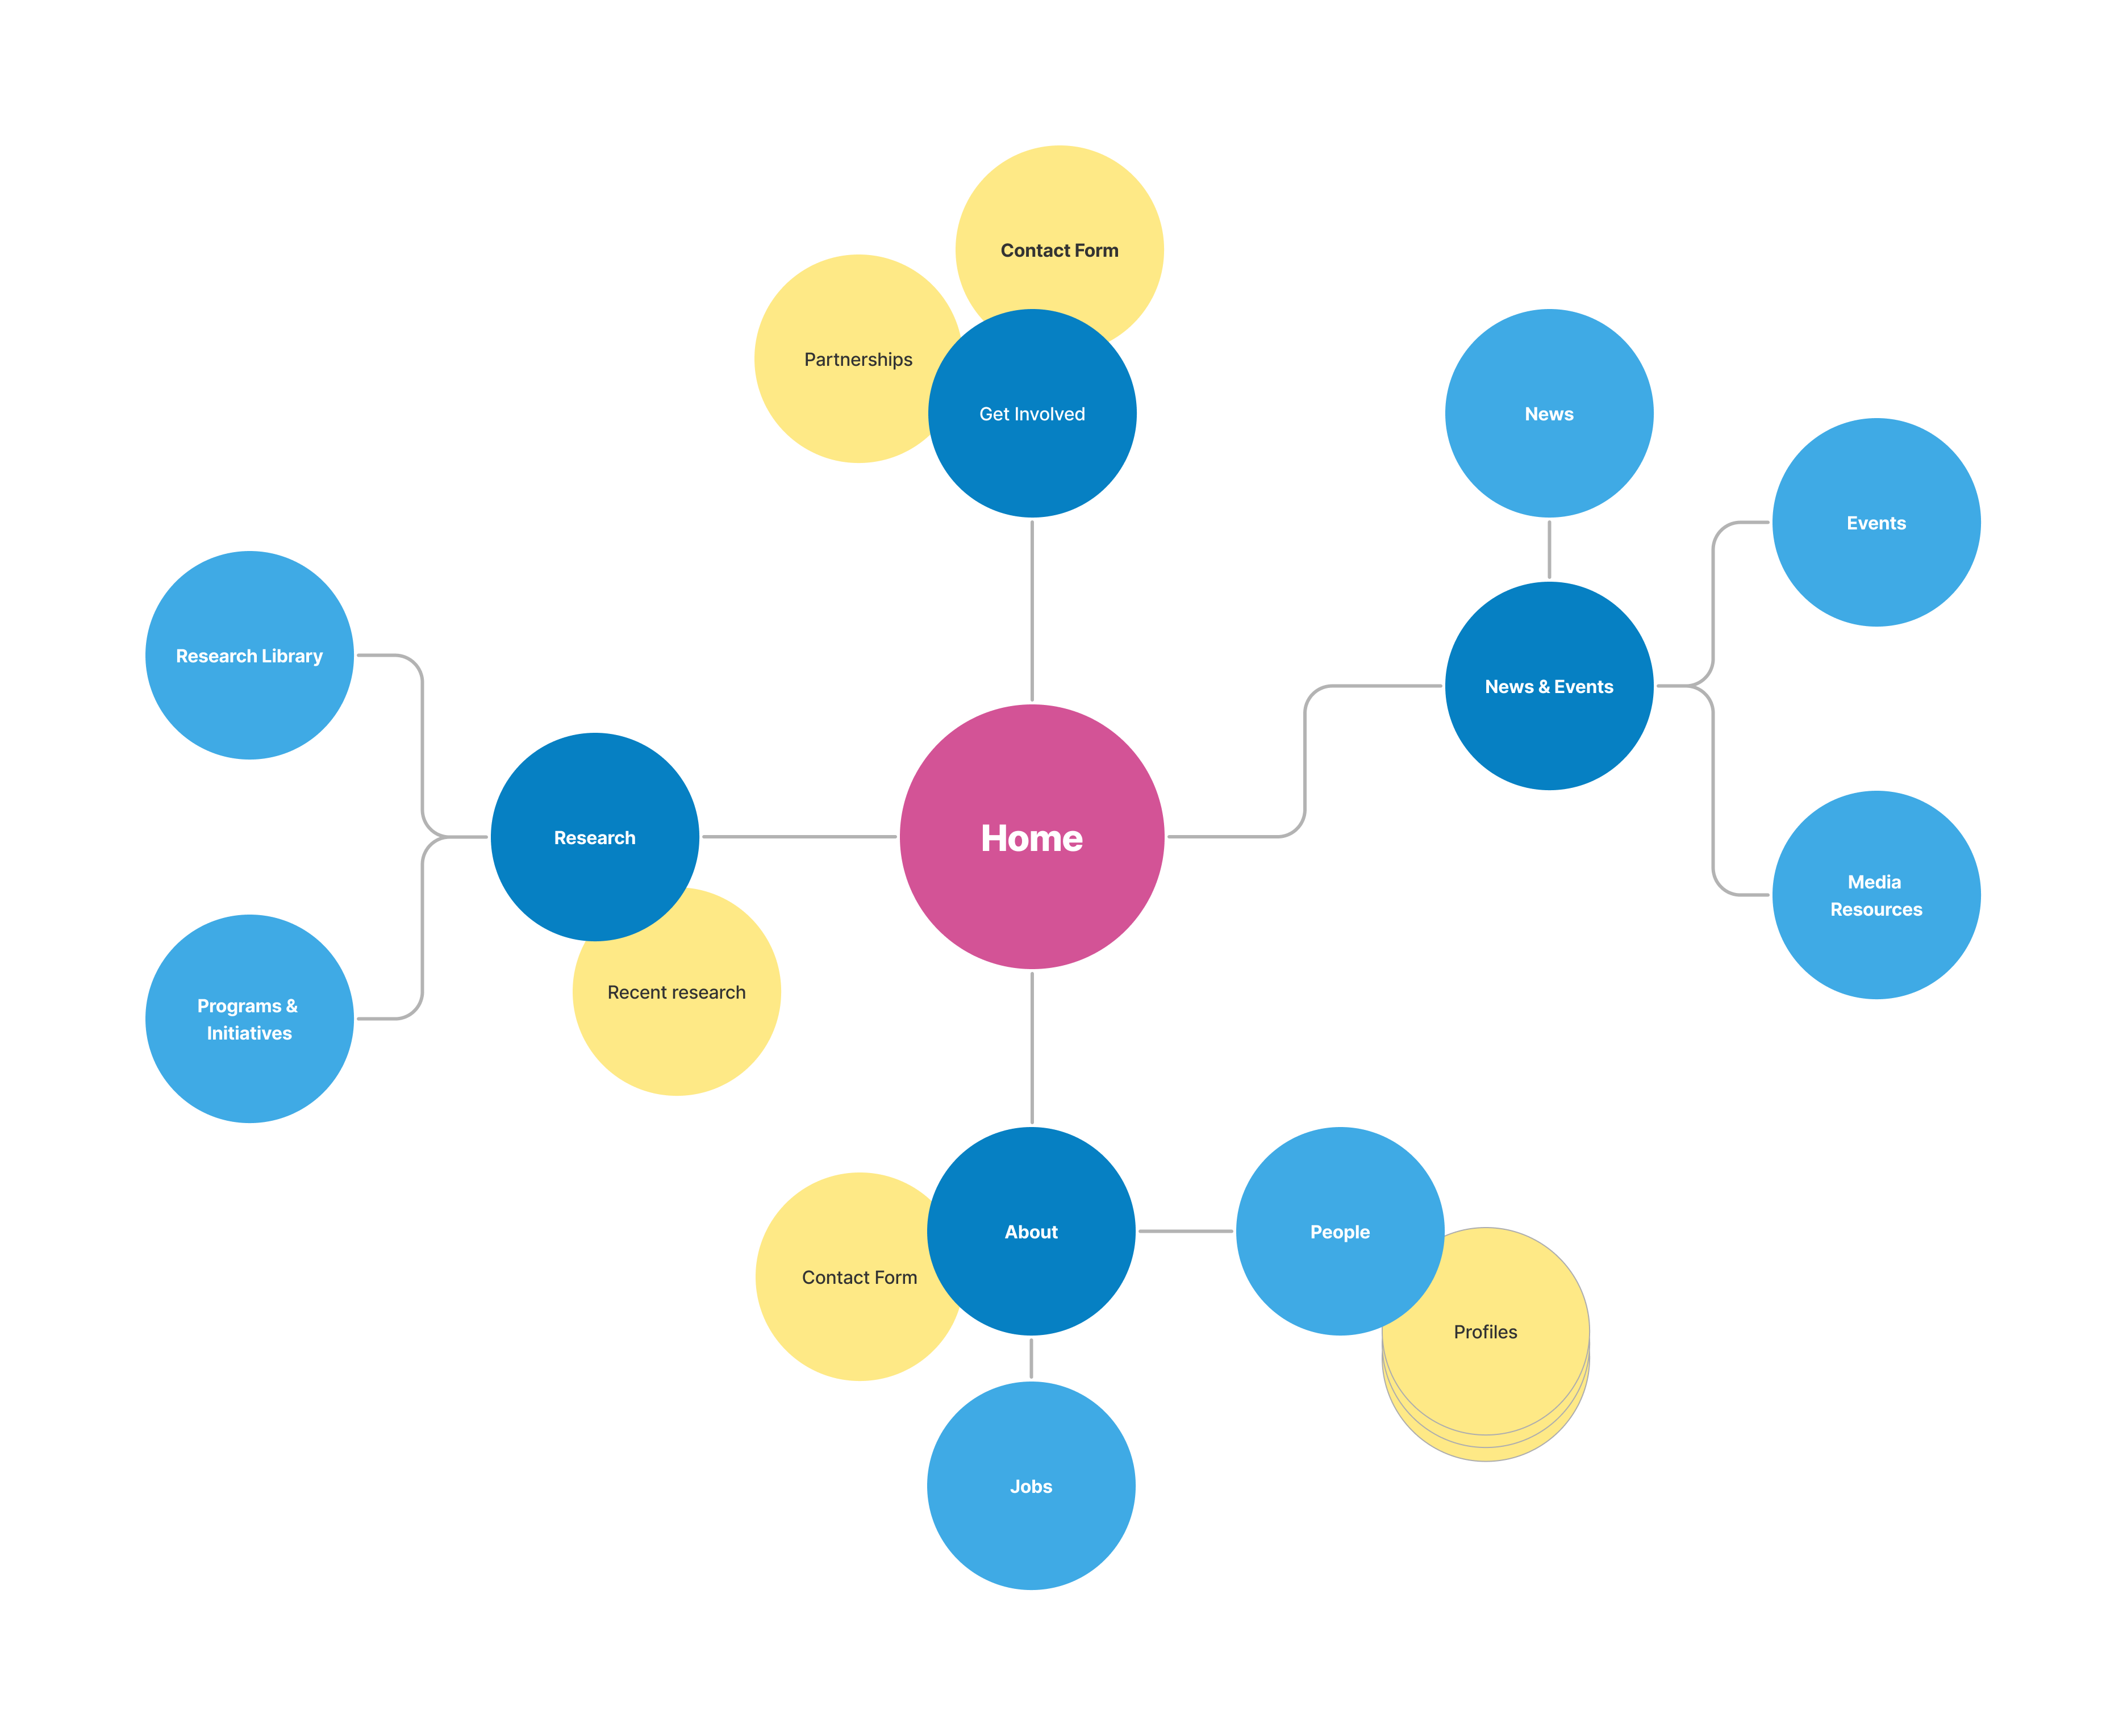 An example content map